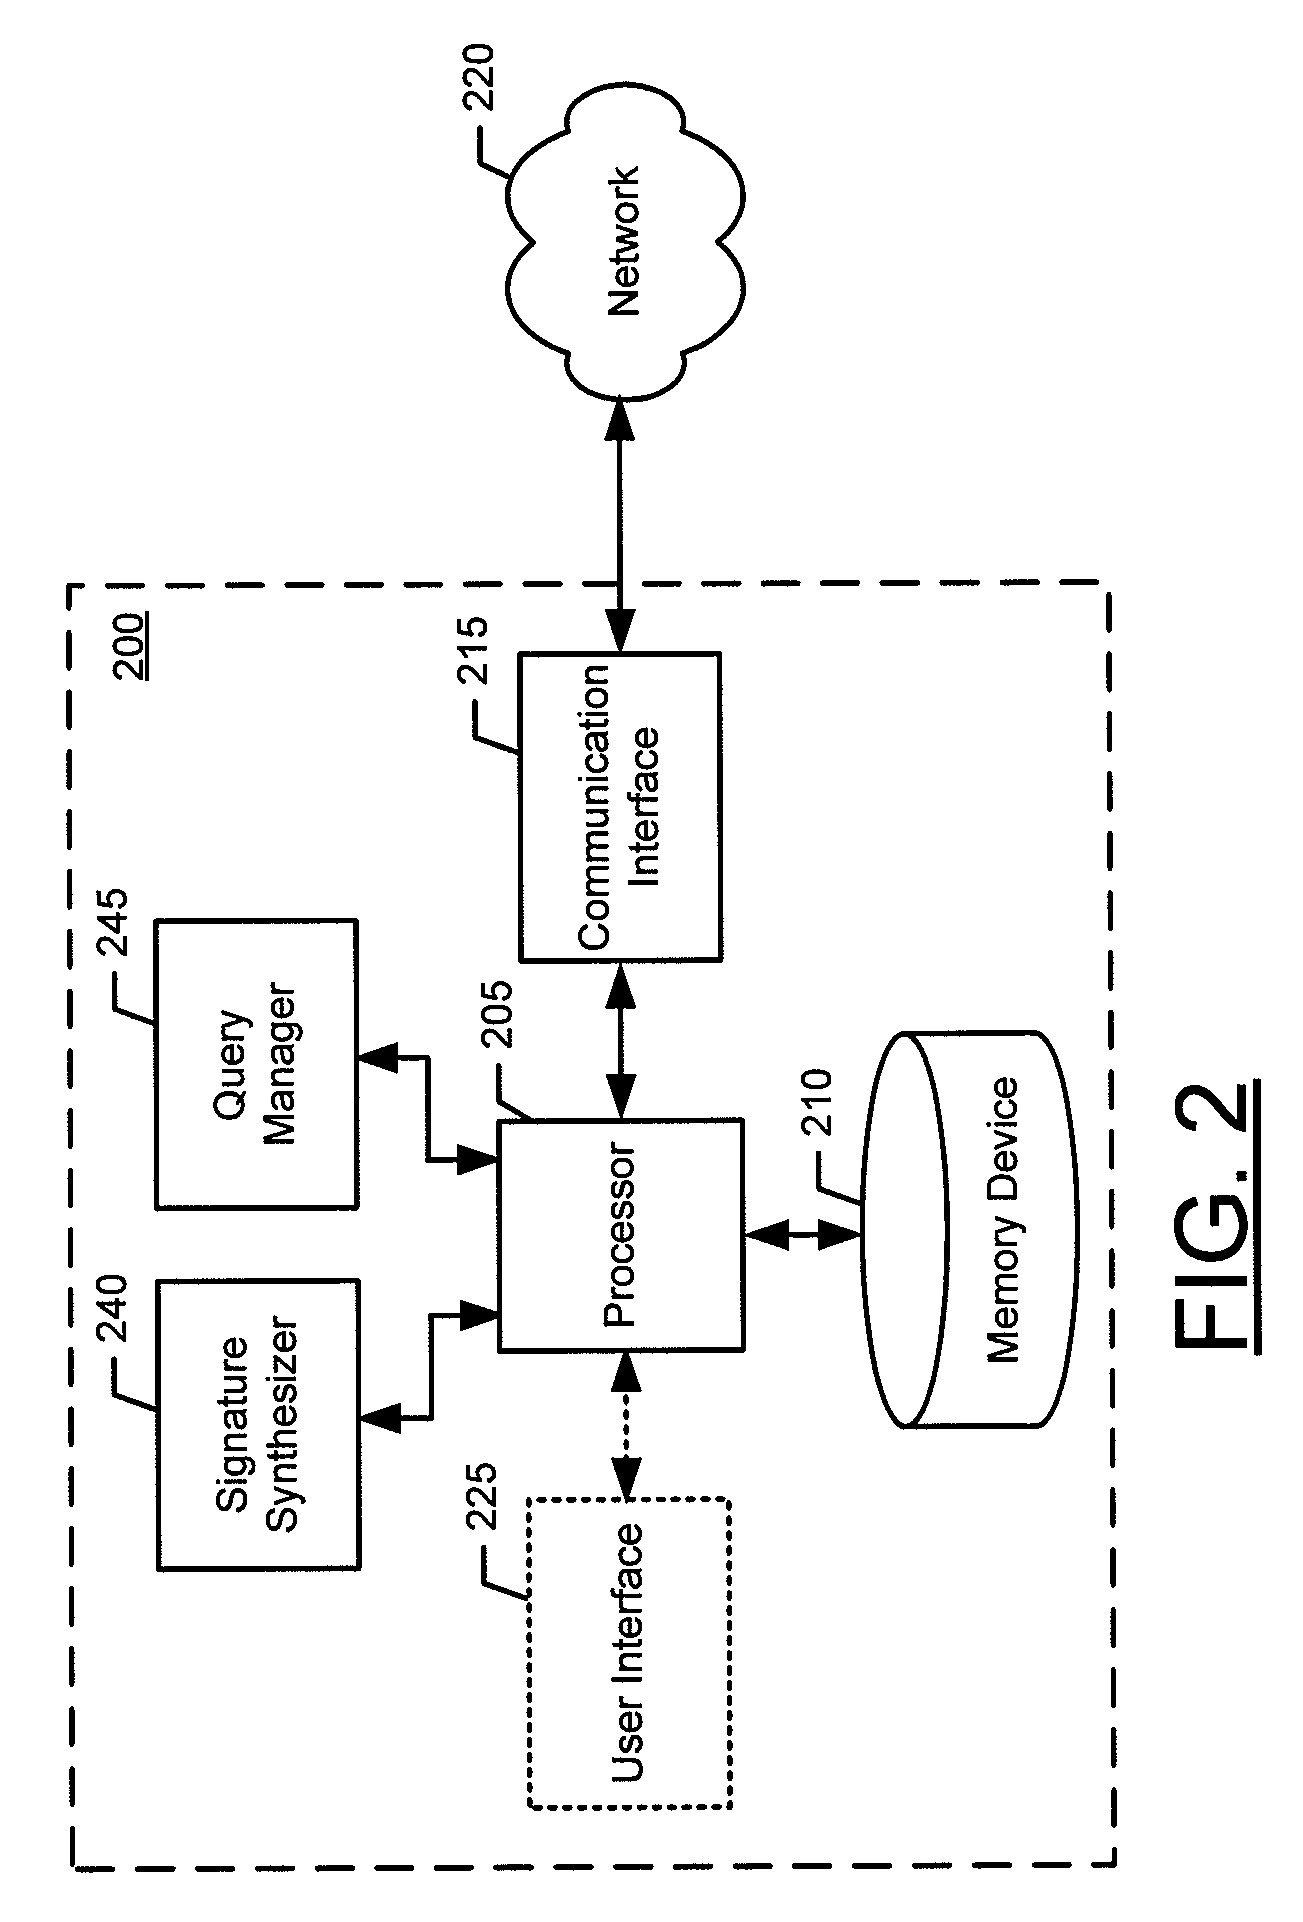 Method, apparatus, and computer program product for determining data signatures in a dynamic distributed device network